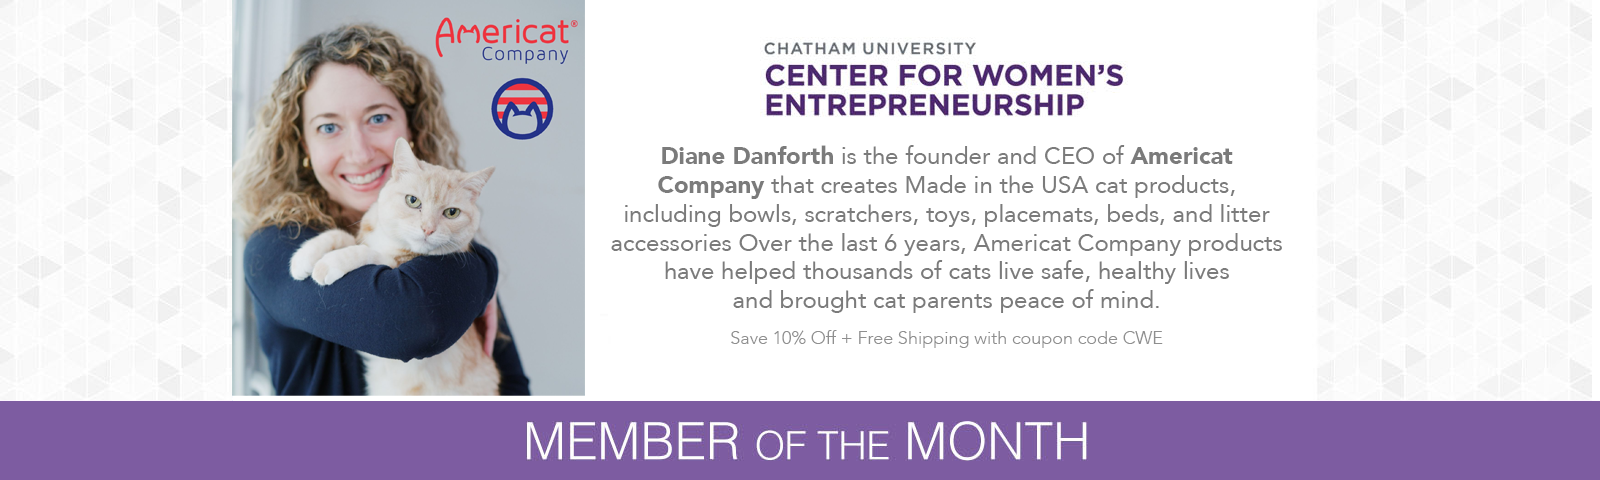 Diane Danforth is the founder and CEO of Americat Company that creates Made in the USA cat products, including bowls, scratchers, toys, placemats, beds, and litter accessories Over the last 6 years, Americat Company products have helped thousands of cats live safe, healthy lives and brought cat parents peace of mind.